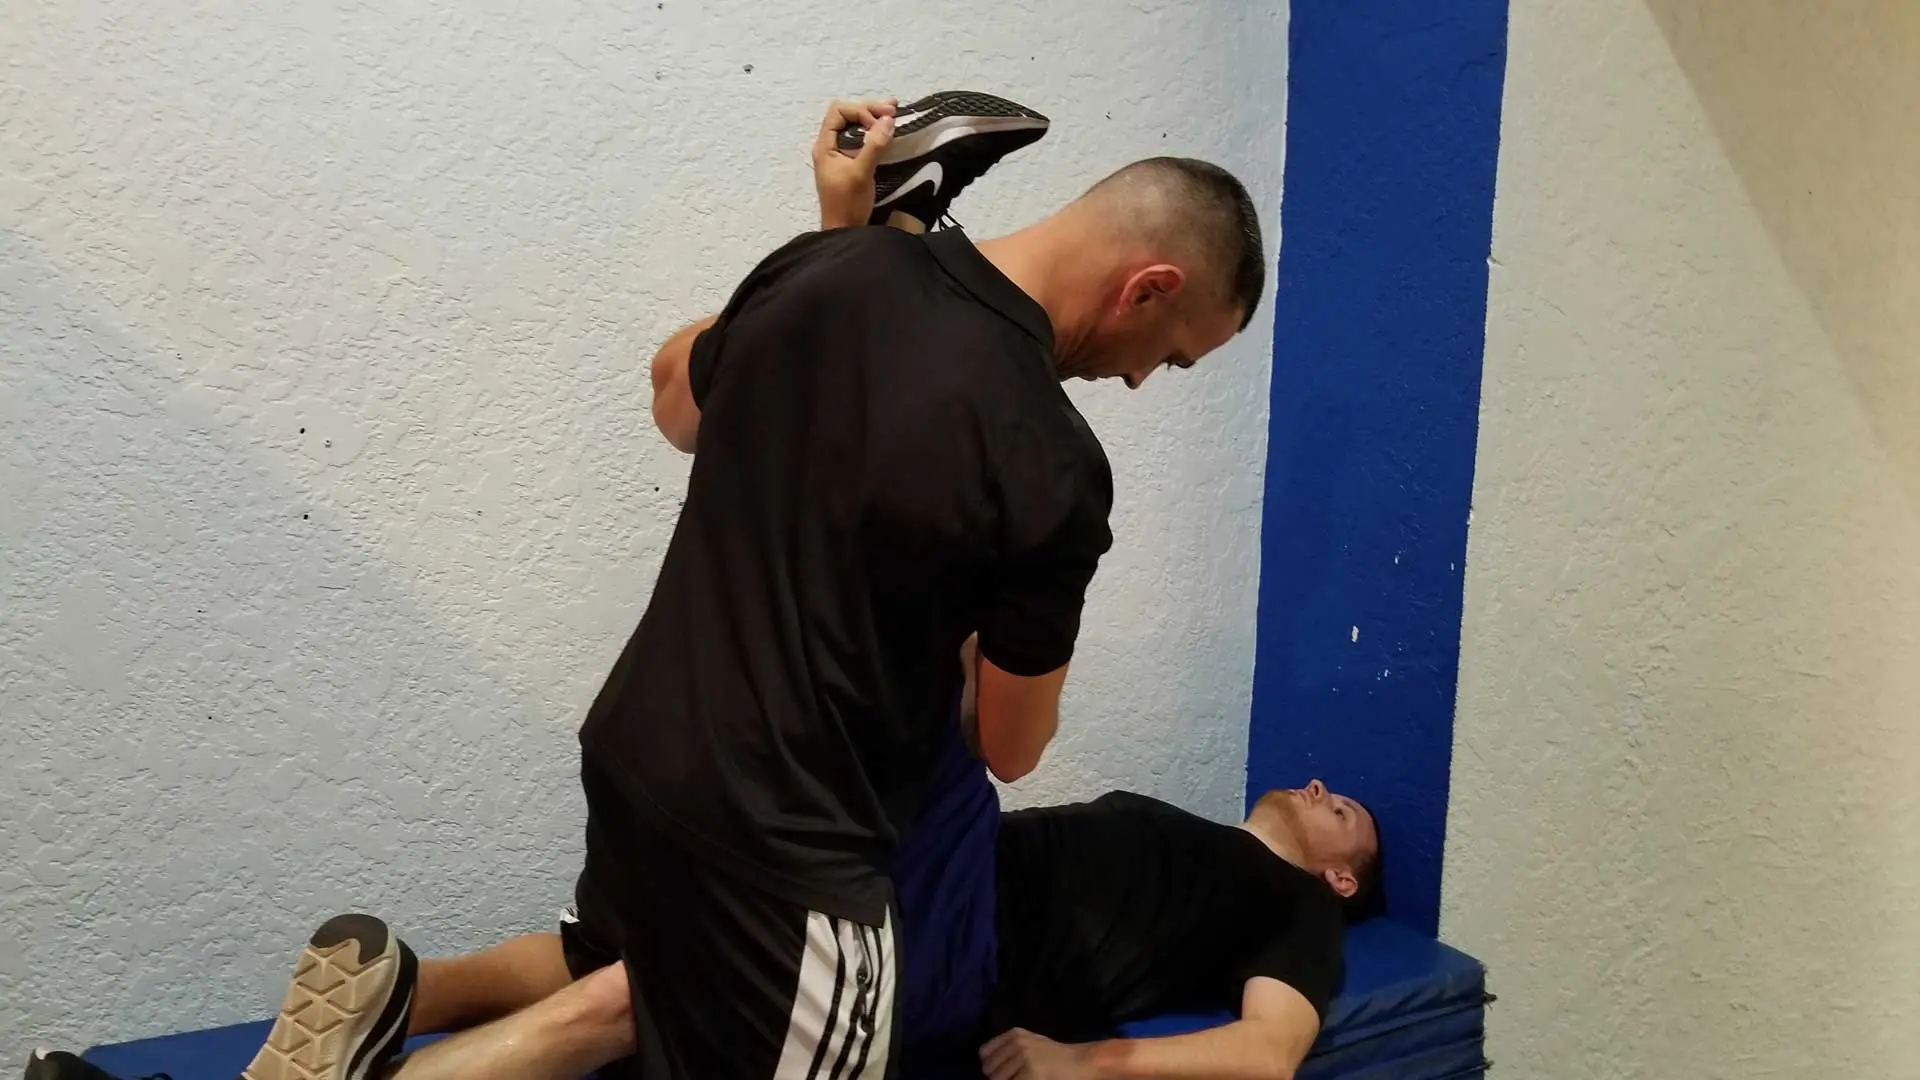 Personal Trainer, Francois Tort stretching a client to increase flexibility in Ruskin, FL.